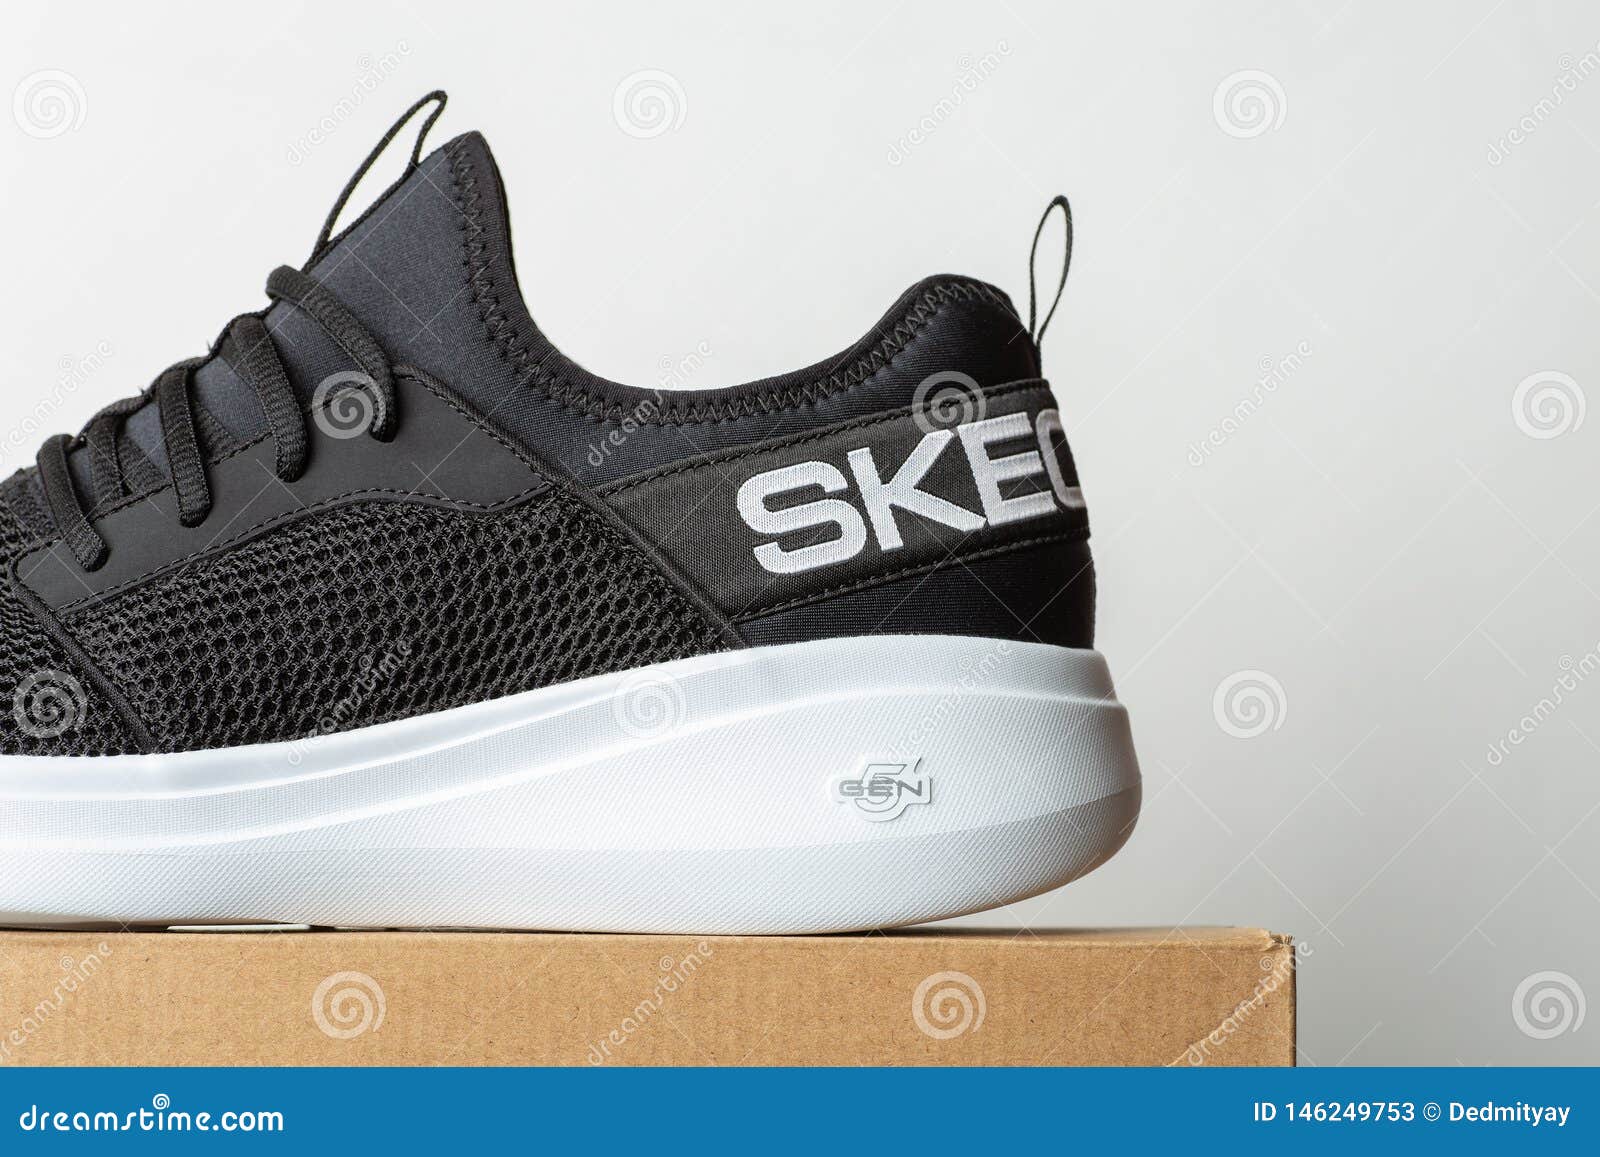 etikette Overlegenhed Modtager 309 Skechers Sneakers Photos - Free & Royalty-Free Stock Photos from  Dreamstime